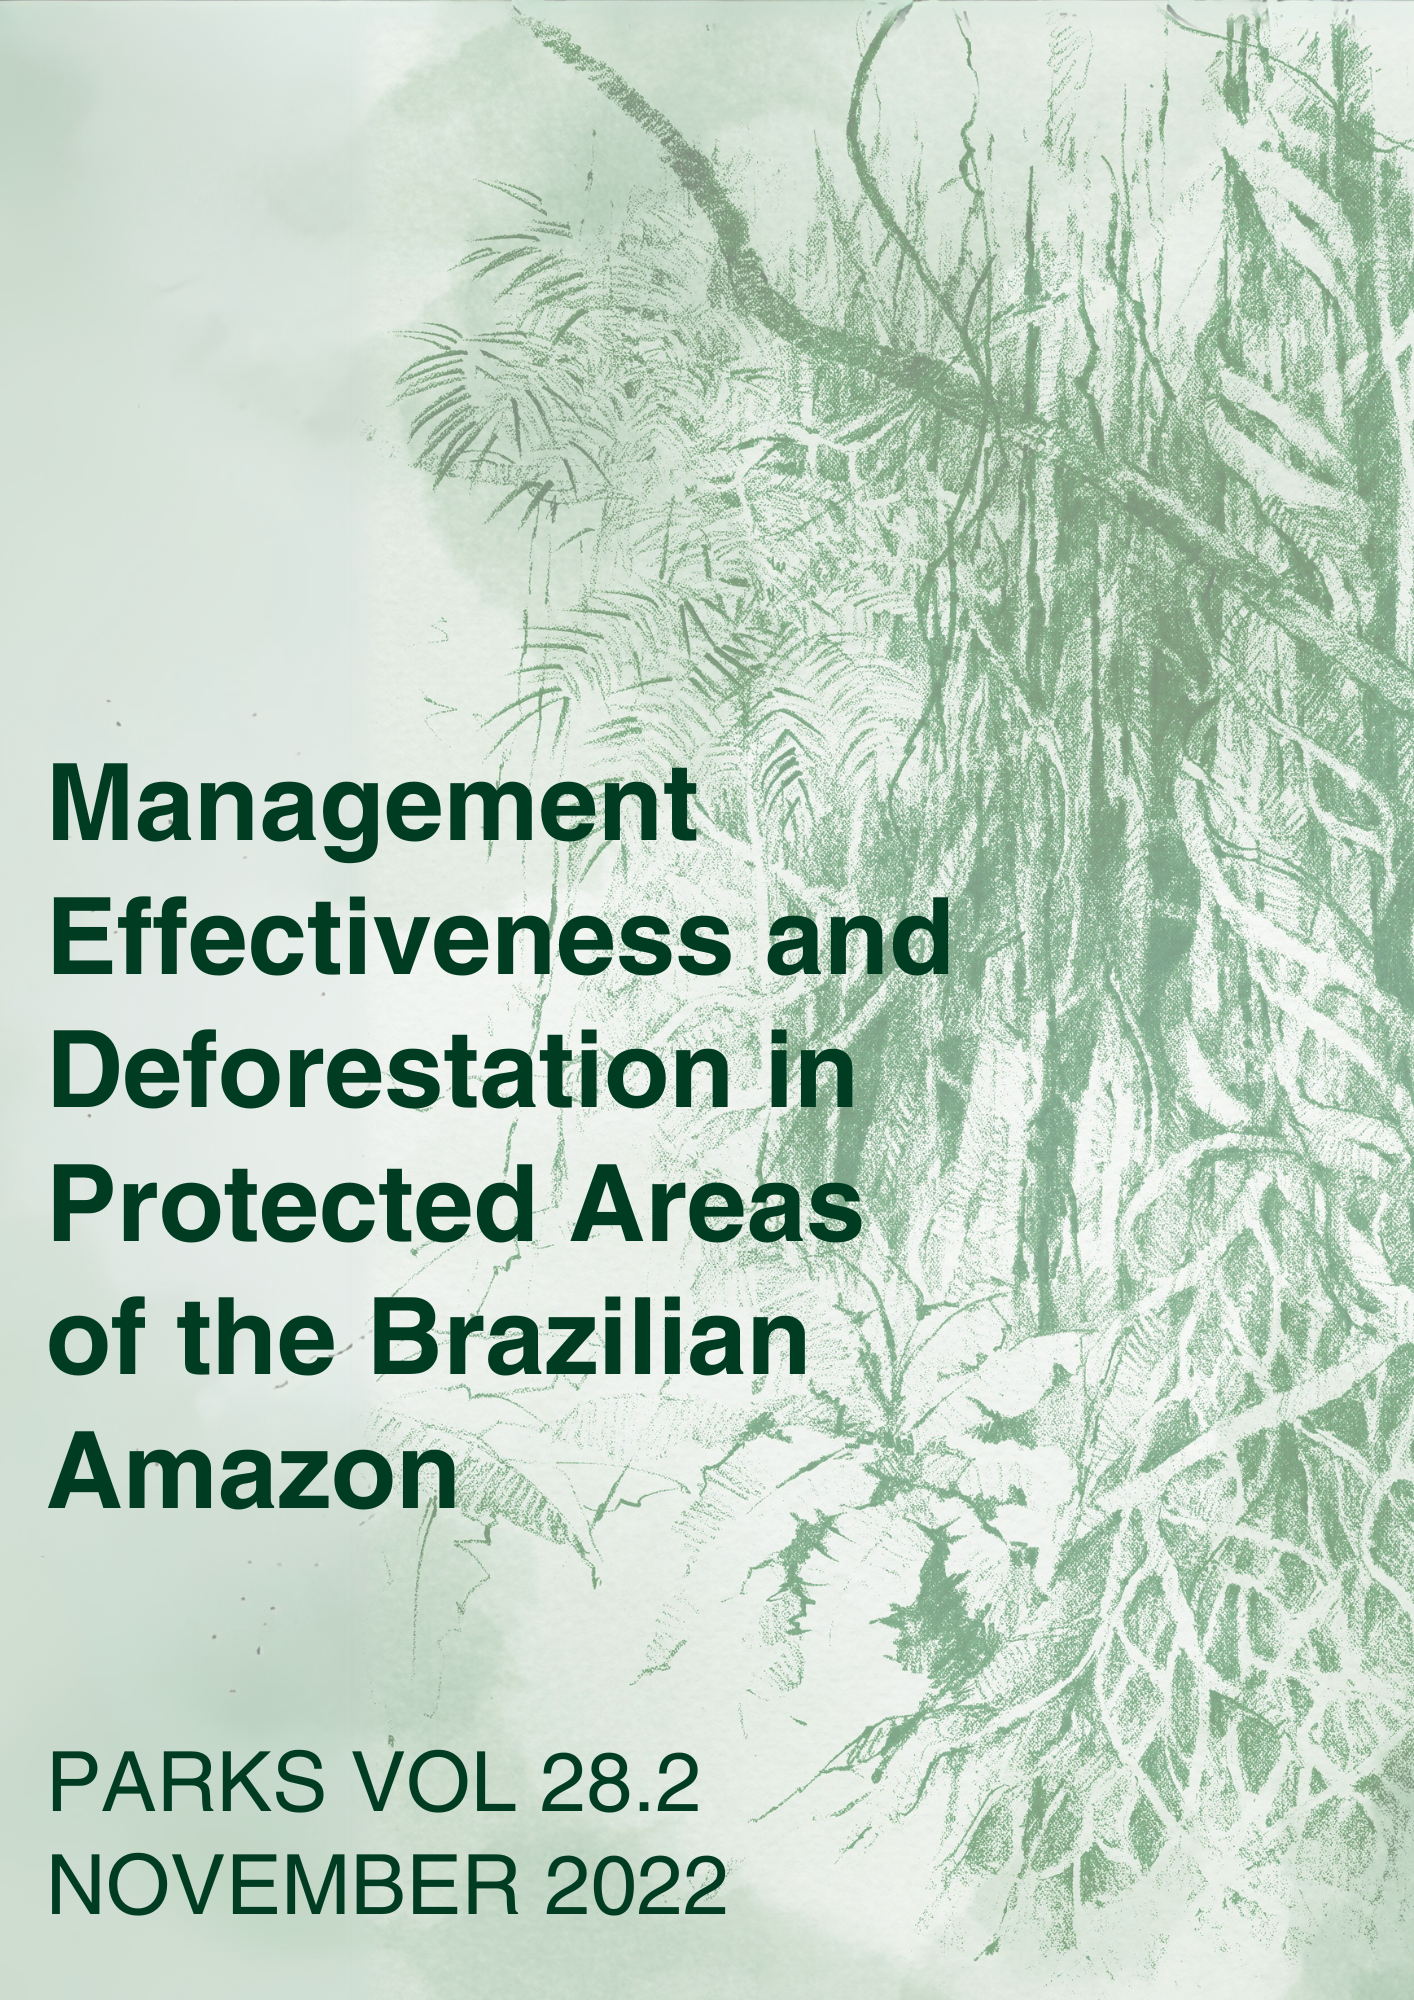 Management Effectiveness and Deforestation in Protected Areas of the Brazilian Amazon – Parks